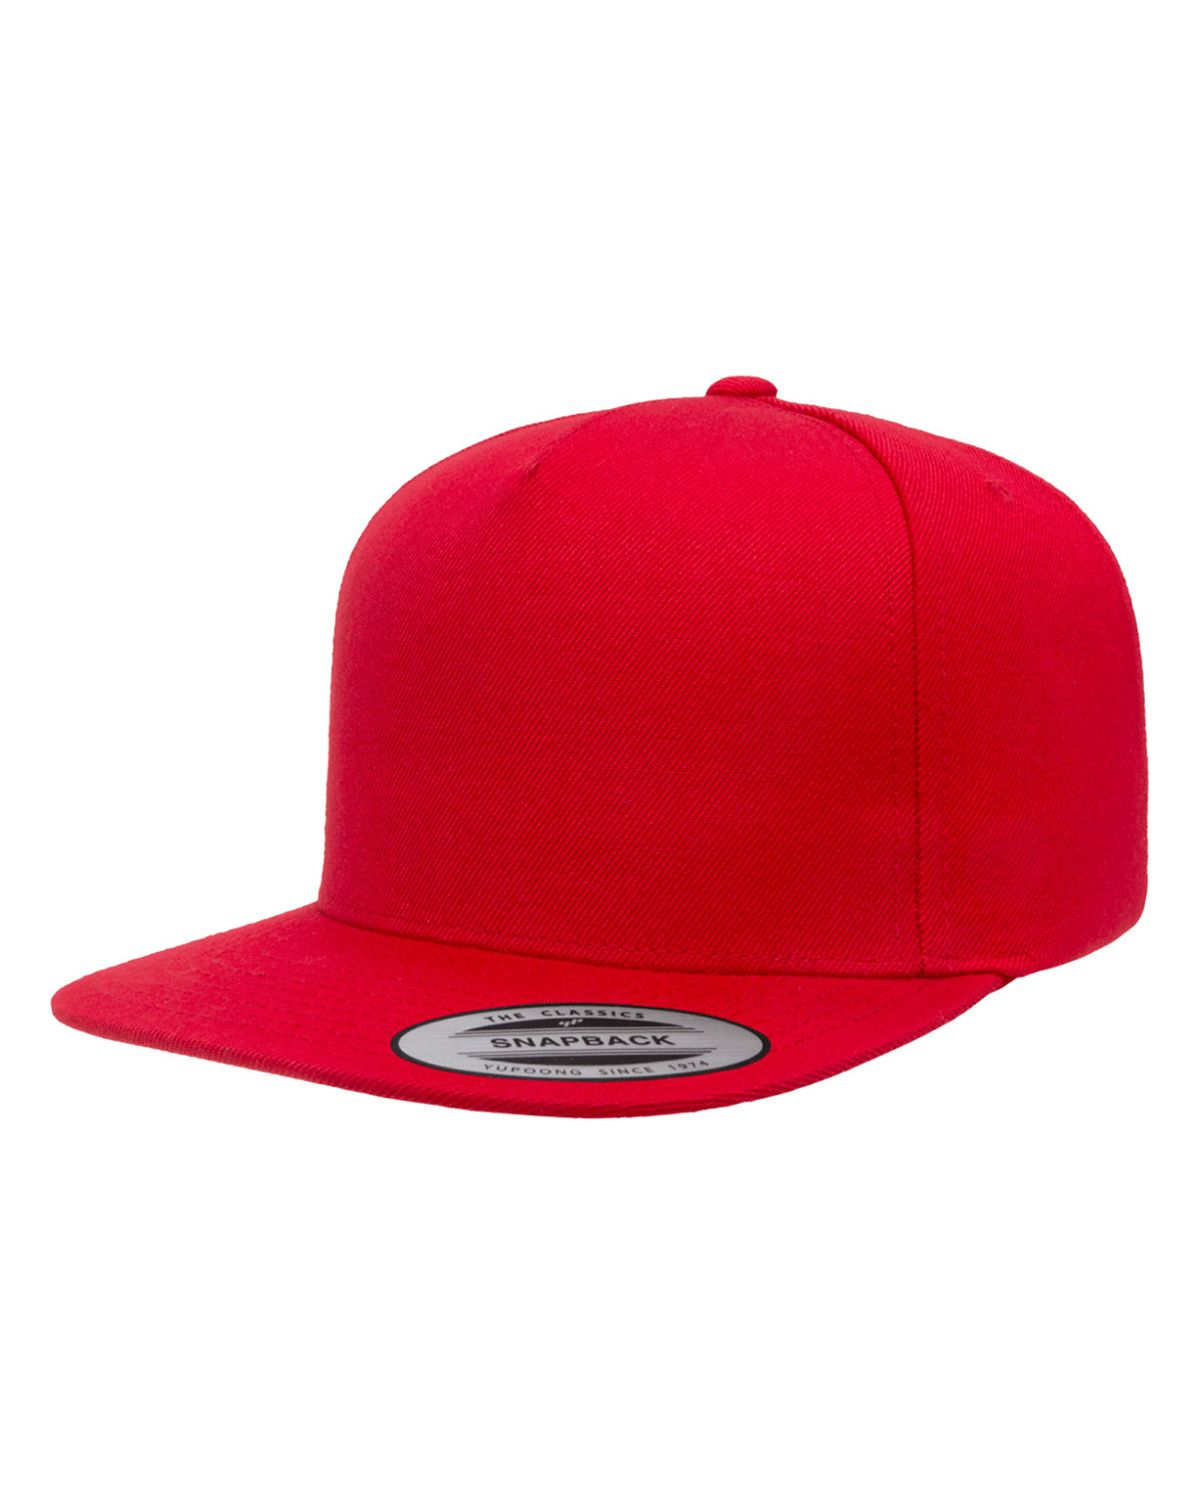 Size Chart for Yupoong Y5089 5-Panel Wool Blend Snapback Cap